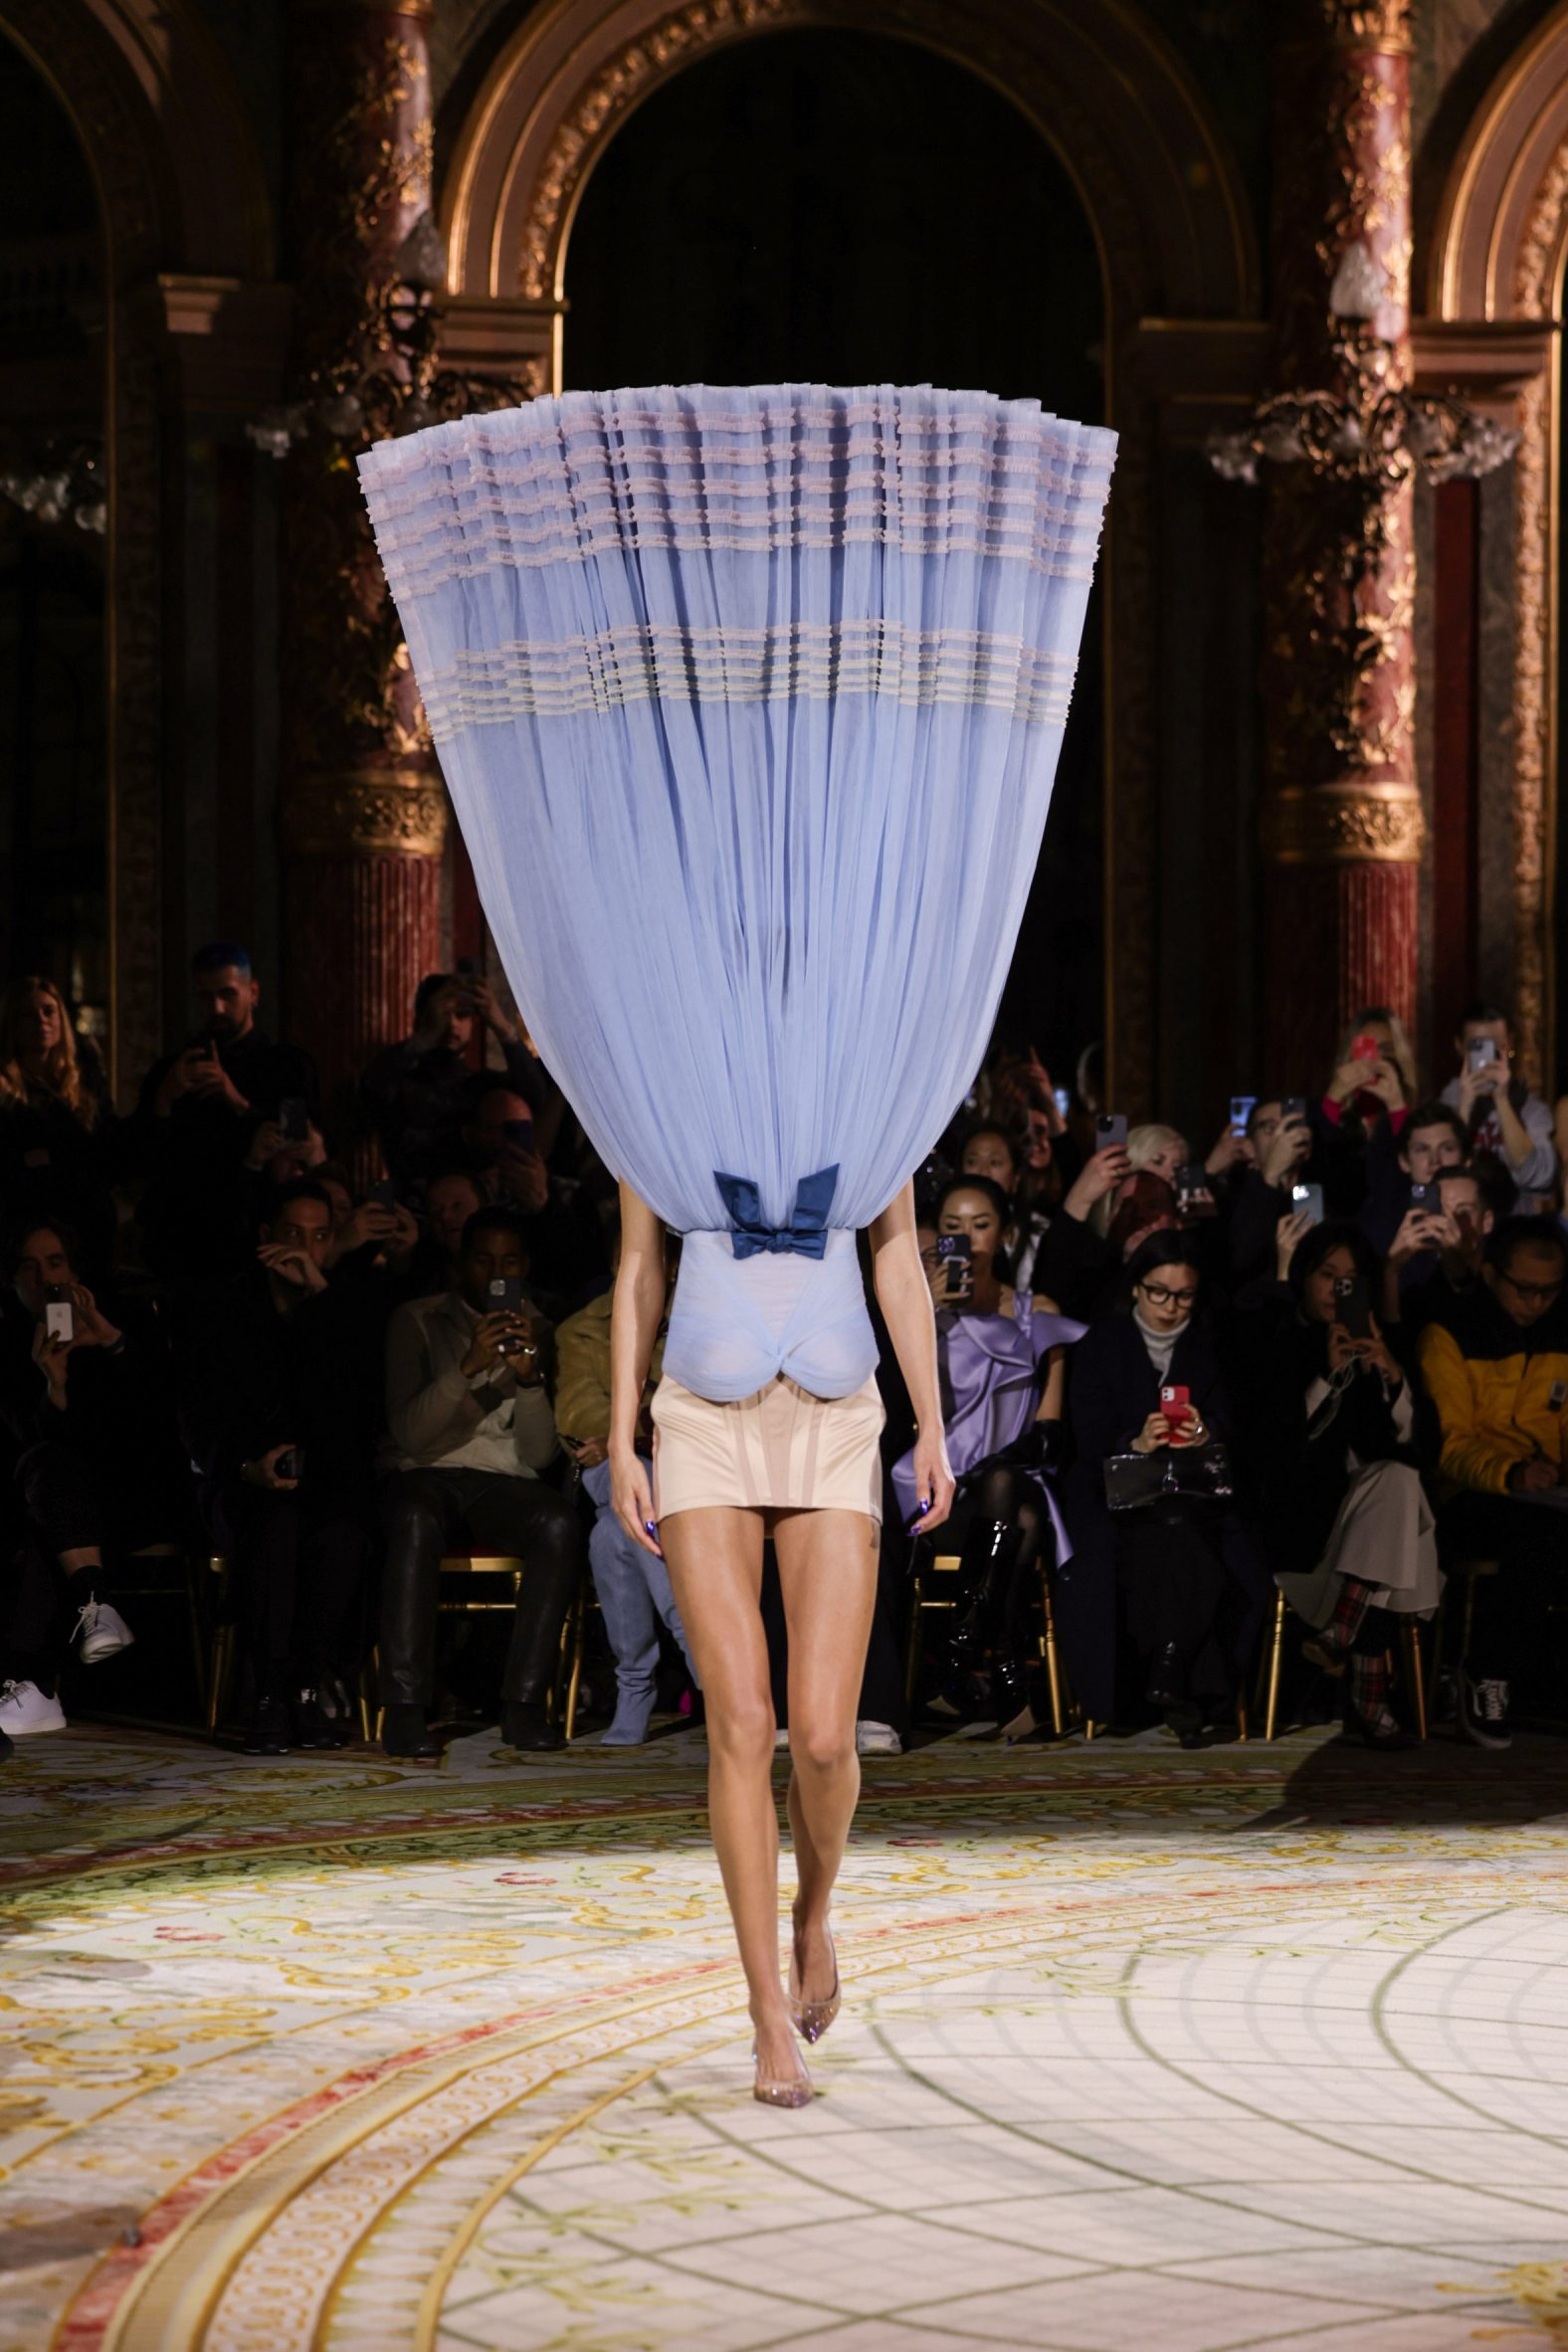 Upside-down Cinderella-style couture ballgown by Viktor & Rolf